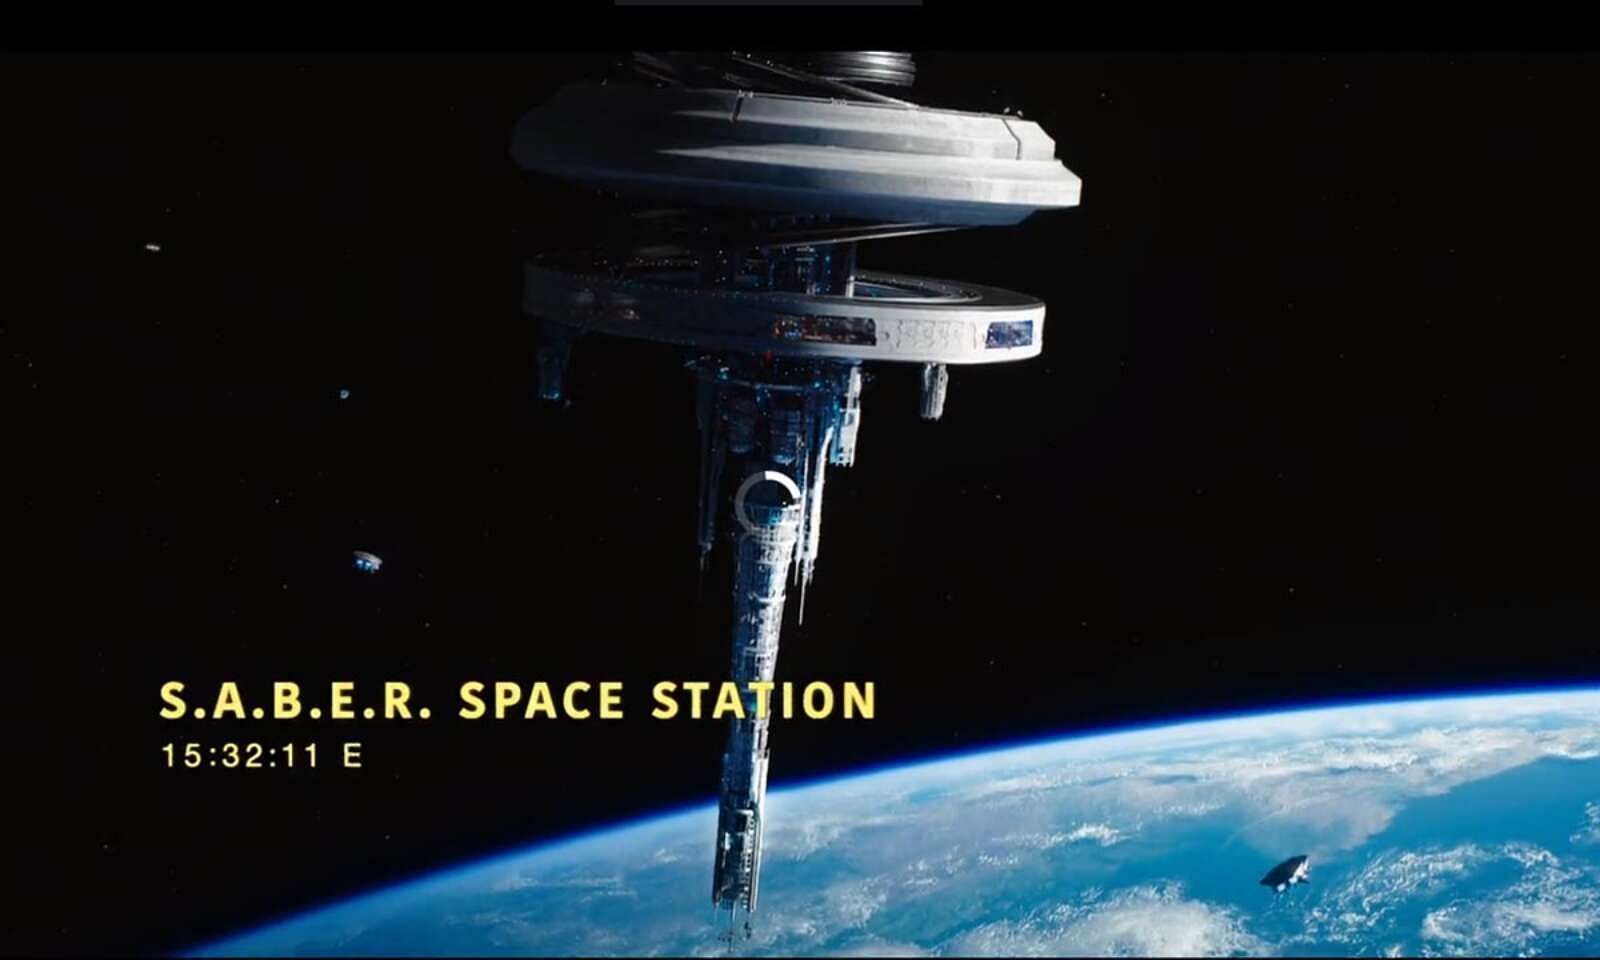 Introducing the S.A.B.E.R. space station in the Marvels (Image via Marvel Studios)